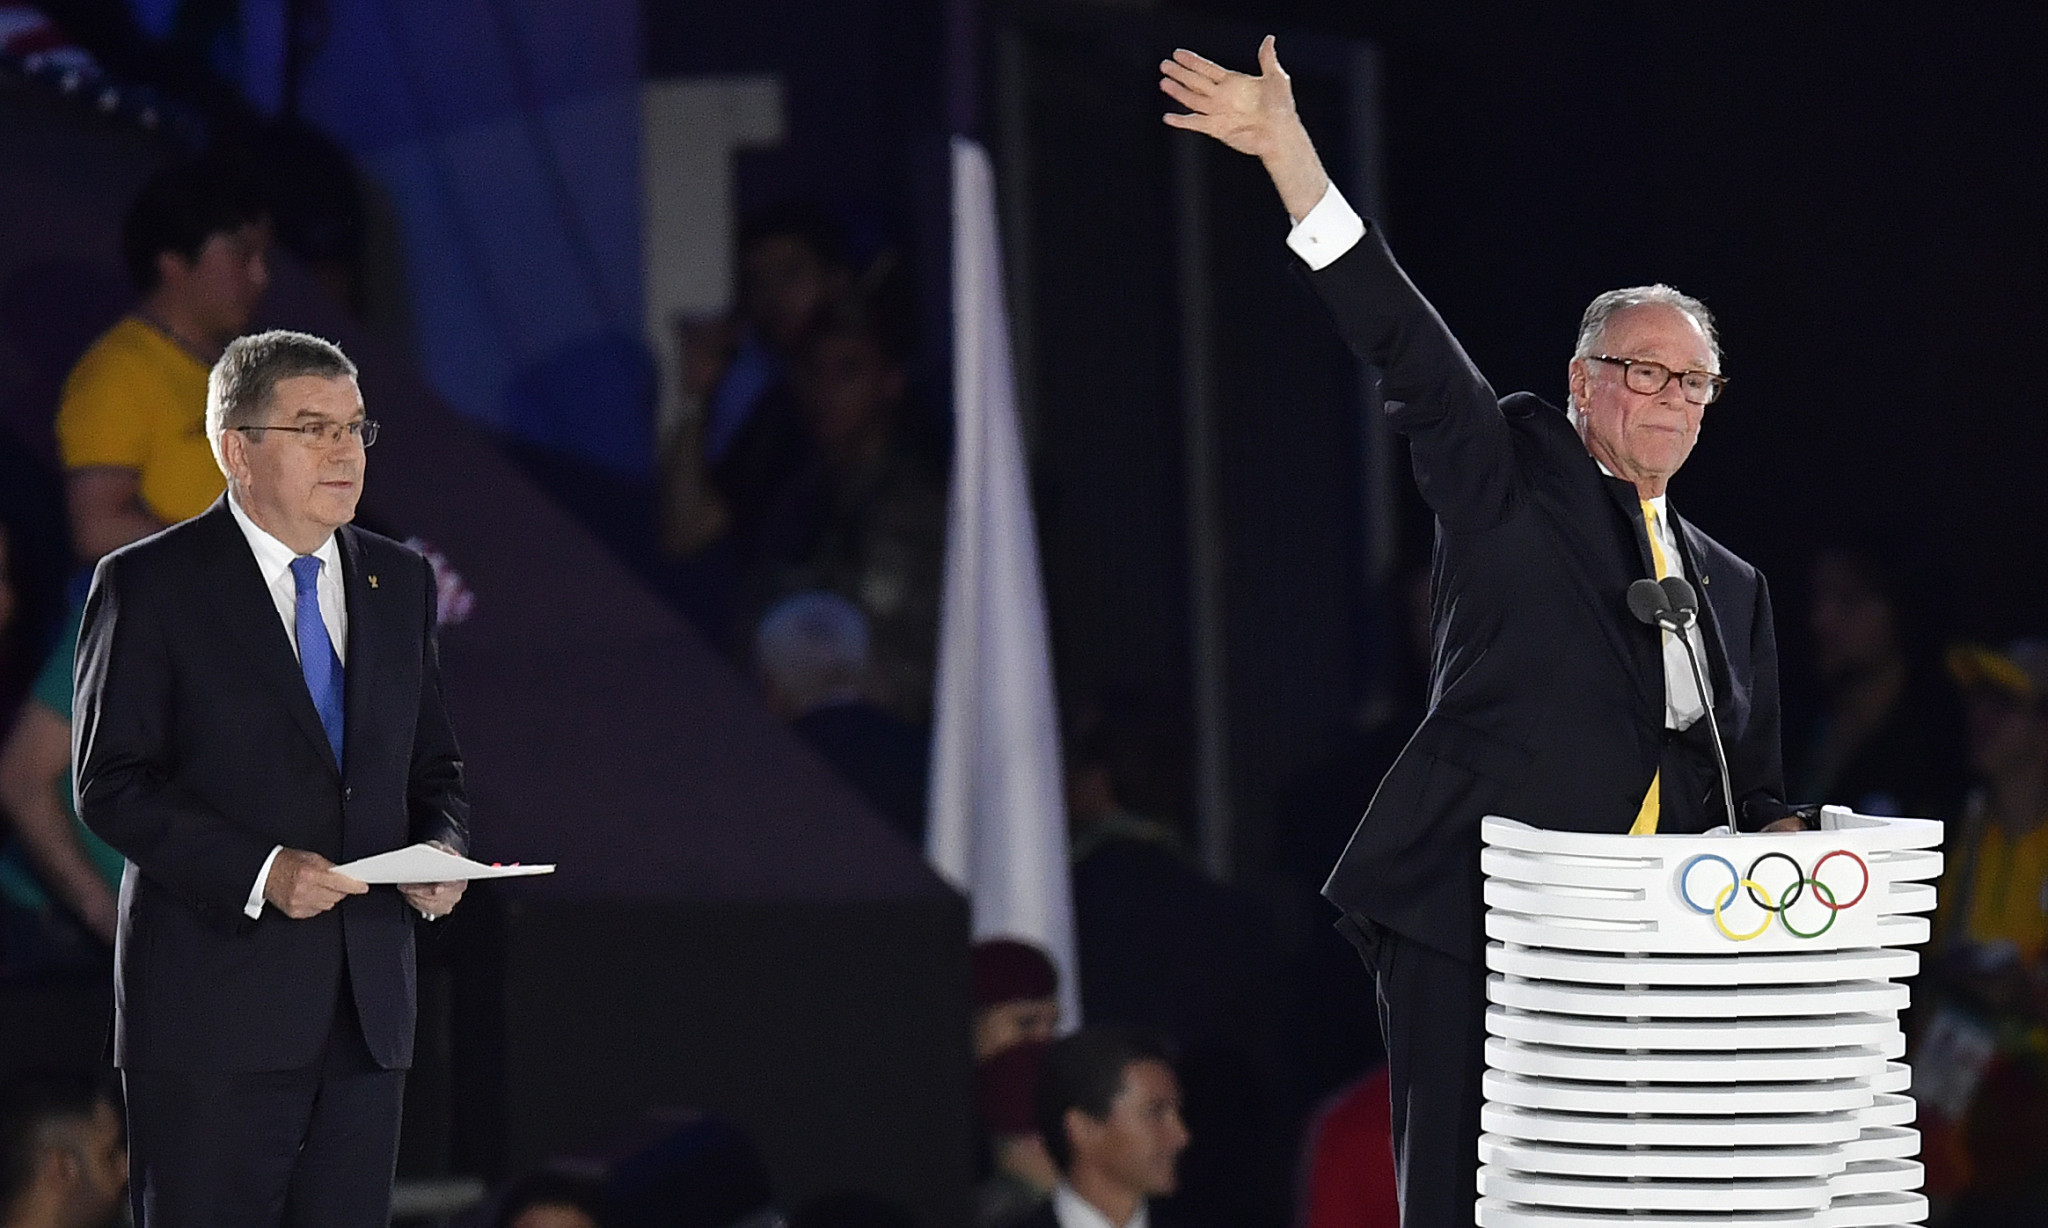 Carlos Nuzman, right, addressing the world at the Closing Ceremony of Rio 2016 ©Getty Images